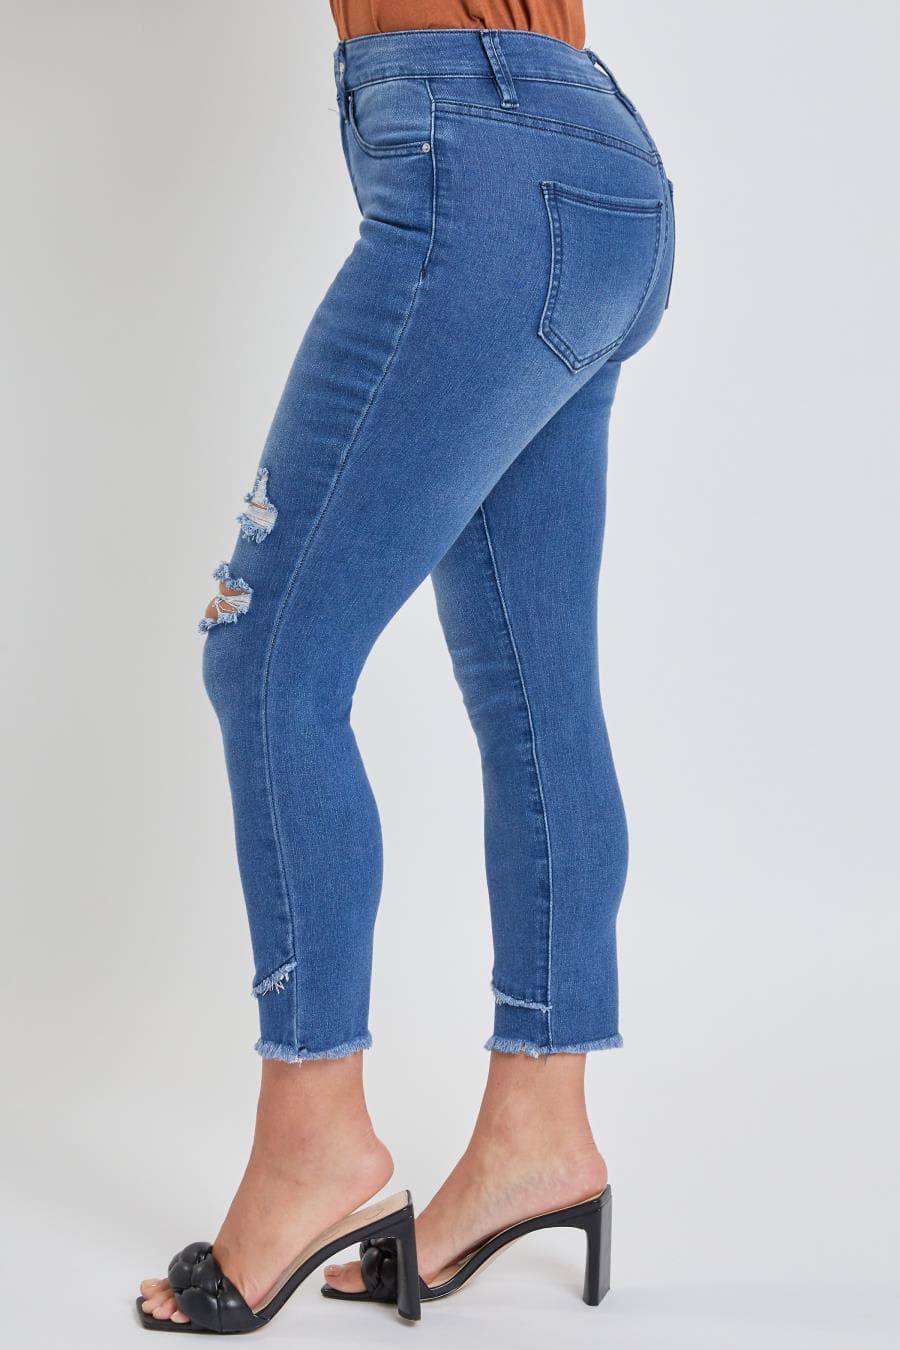 Petite Women Skinny High Rise Ankle Jean With Slanted Double Frayed Hem Made With Recycled Fibers Pp86051N